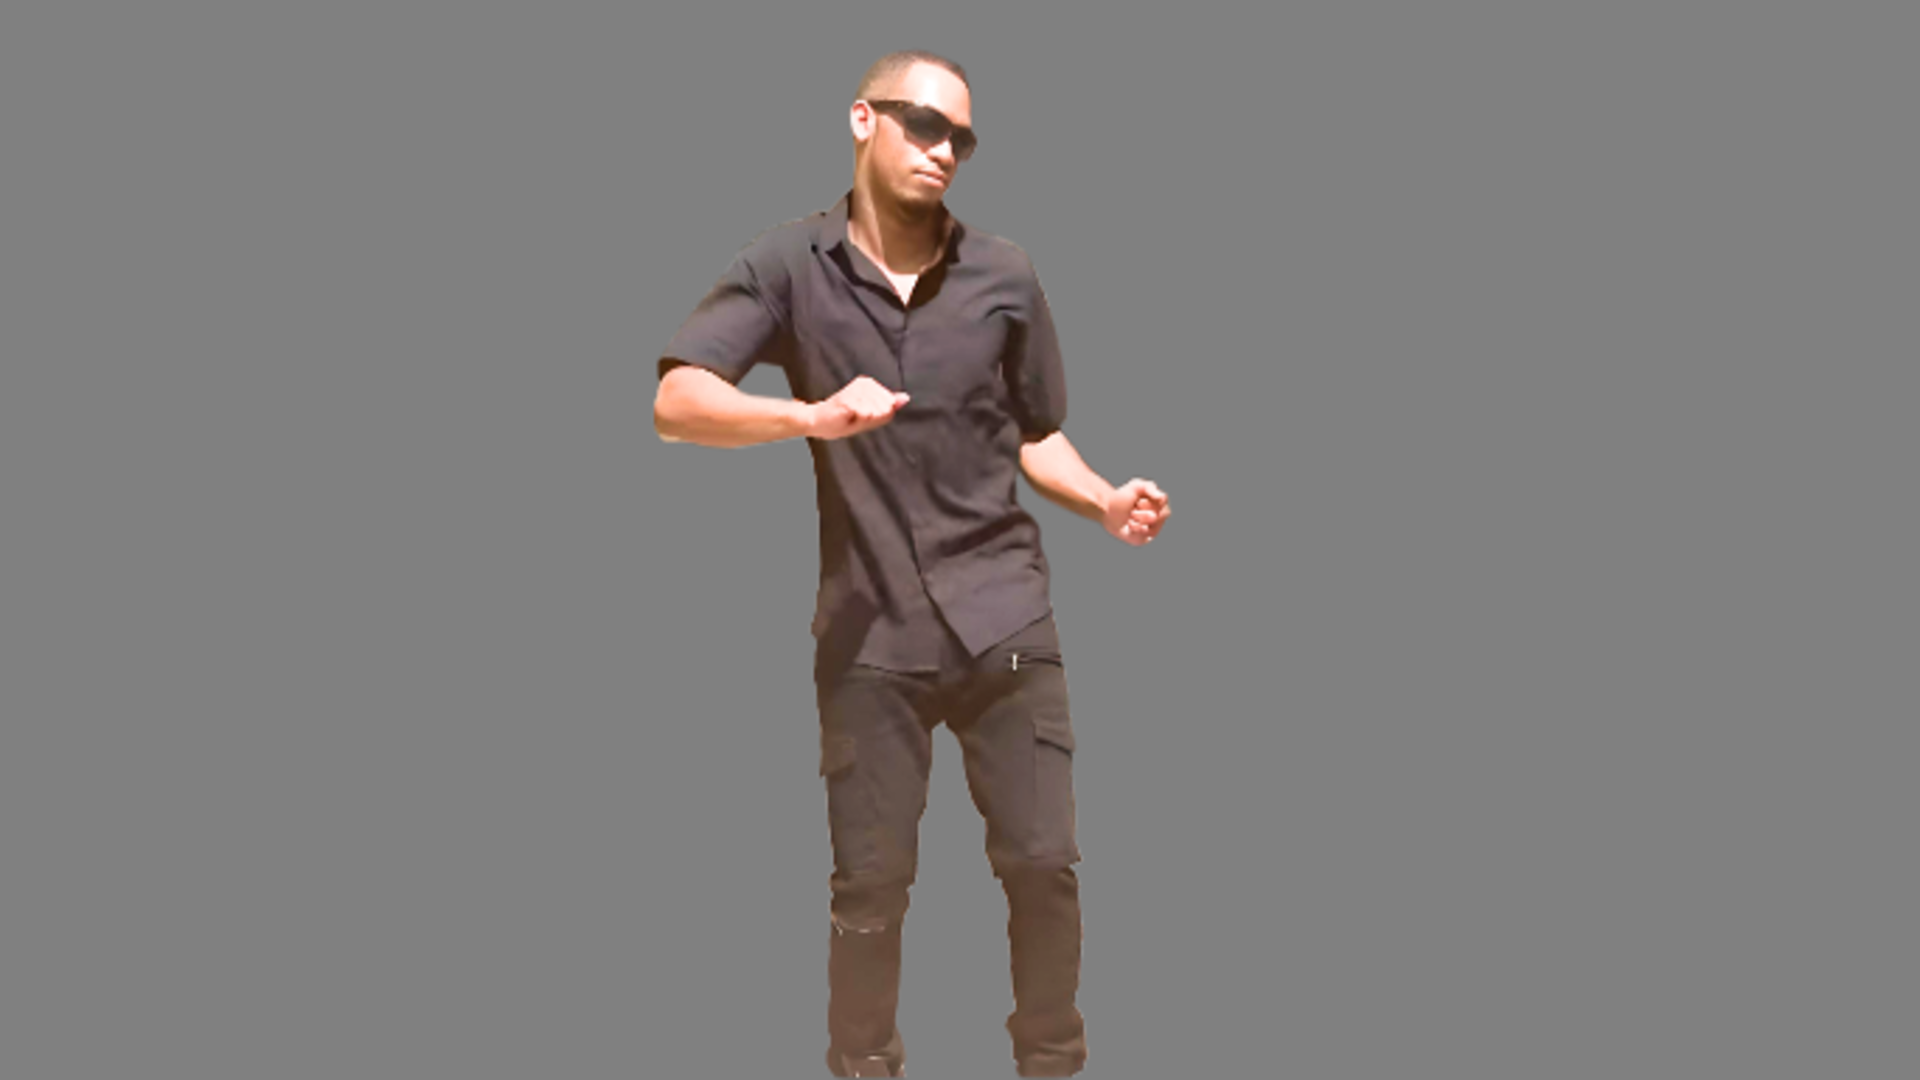 Ice JJ Fish, wearing dark greyish or brownish shirt and pants enjoying his own music with grey background, depicting Ice JJ Fish Net Worth 2023: Age, Wife, Earning, Career